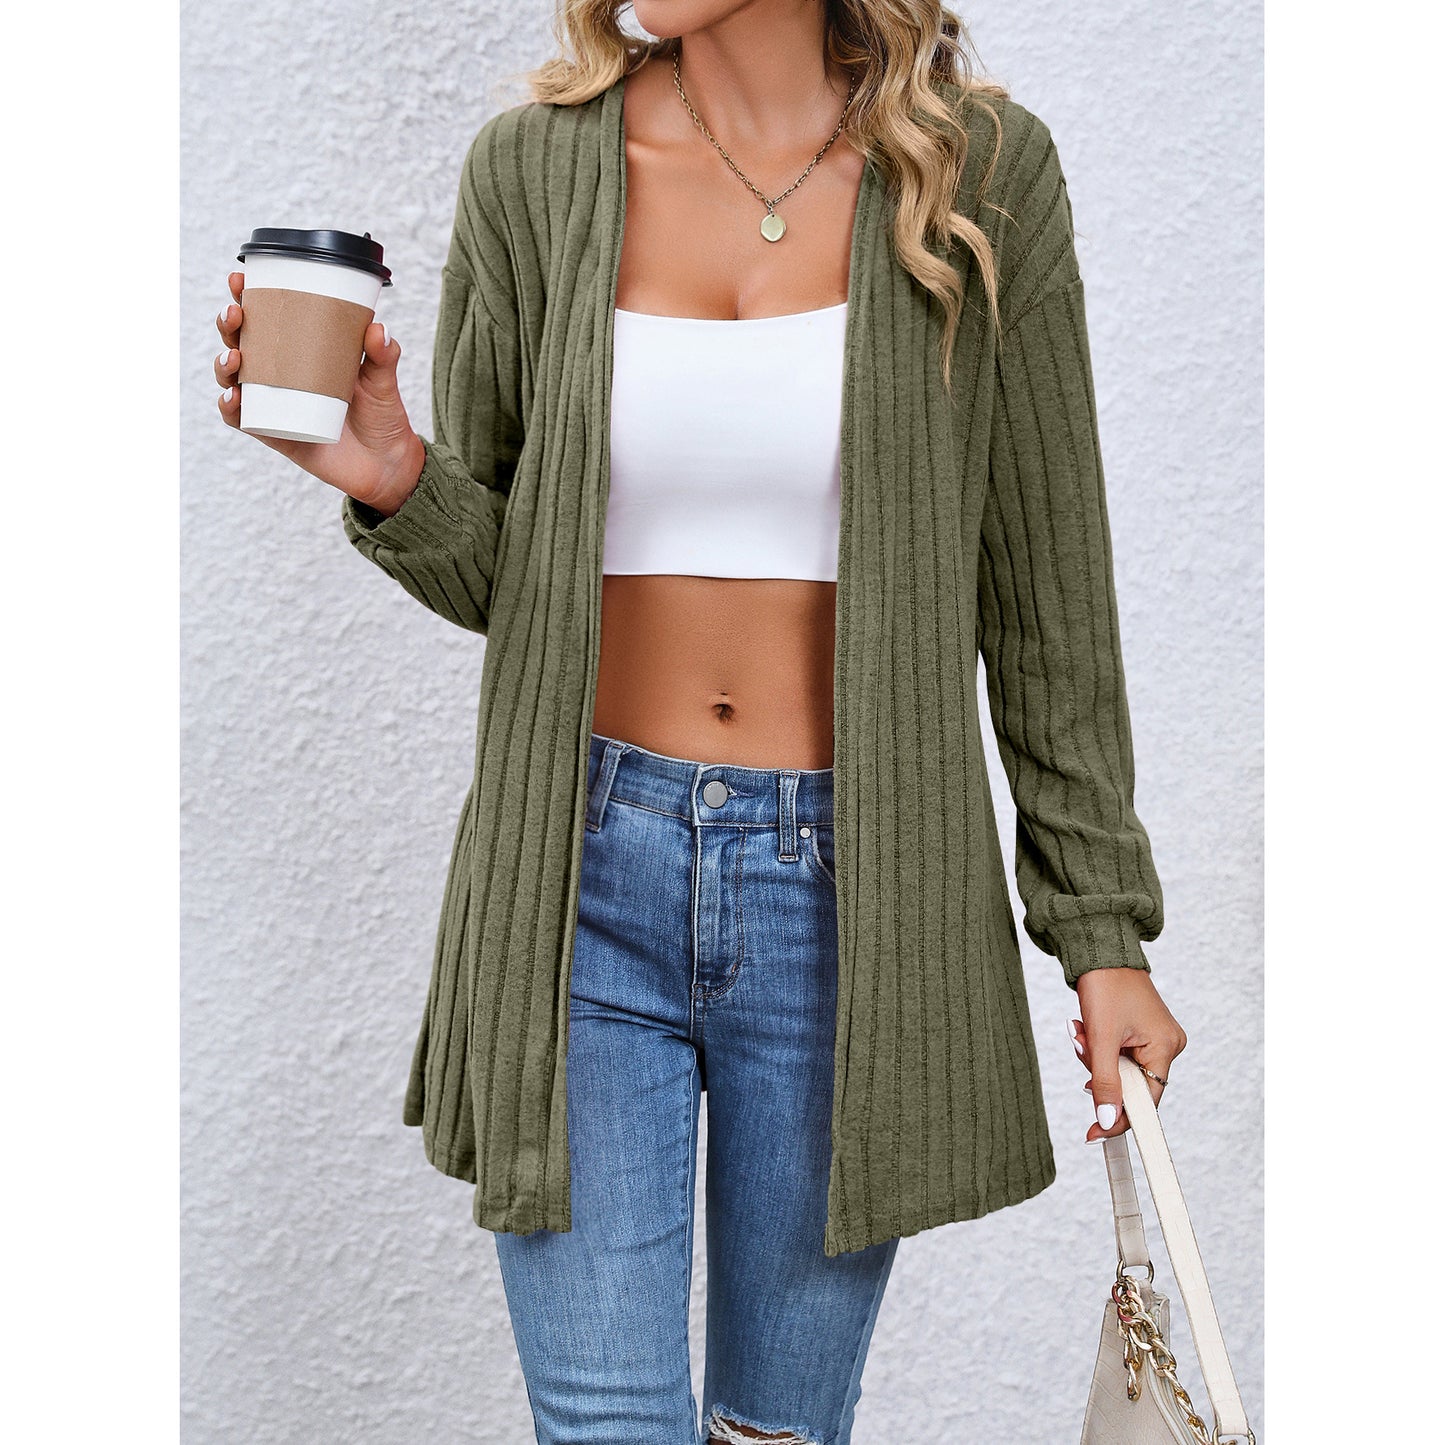 Women's Fashion Loose Casual Style Cardigan Cape Top